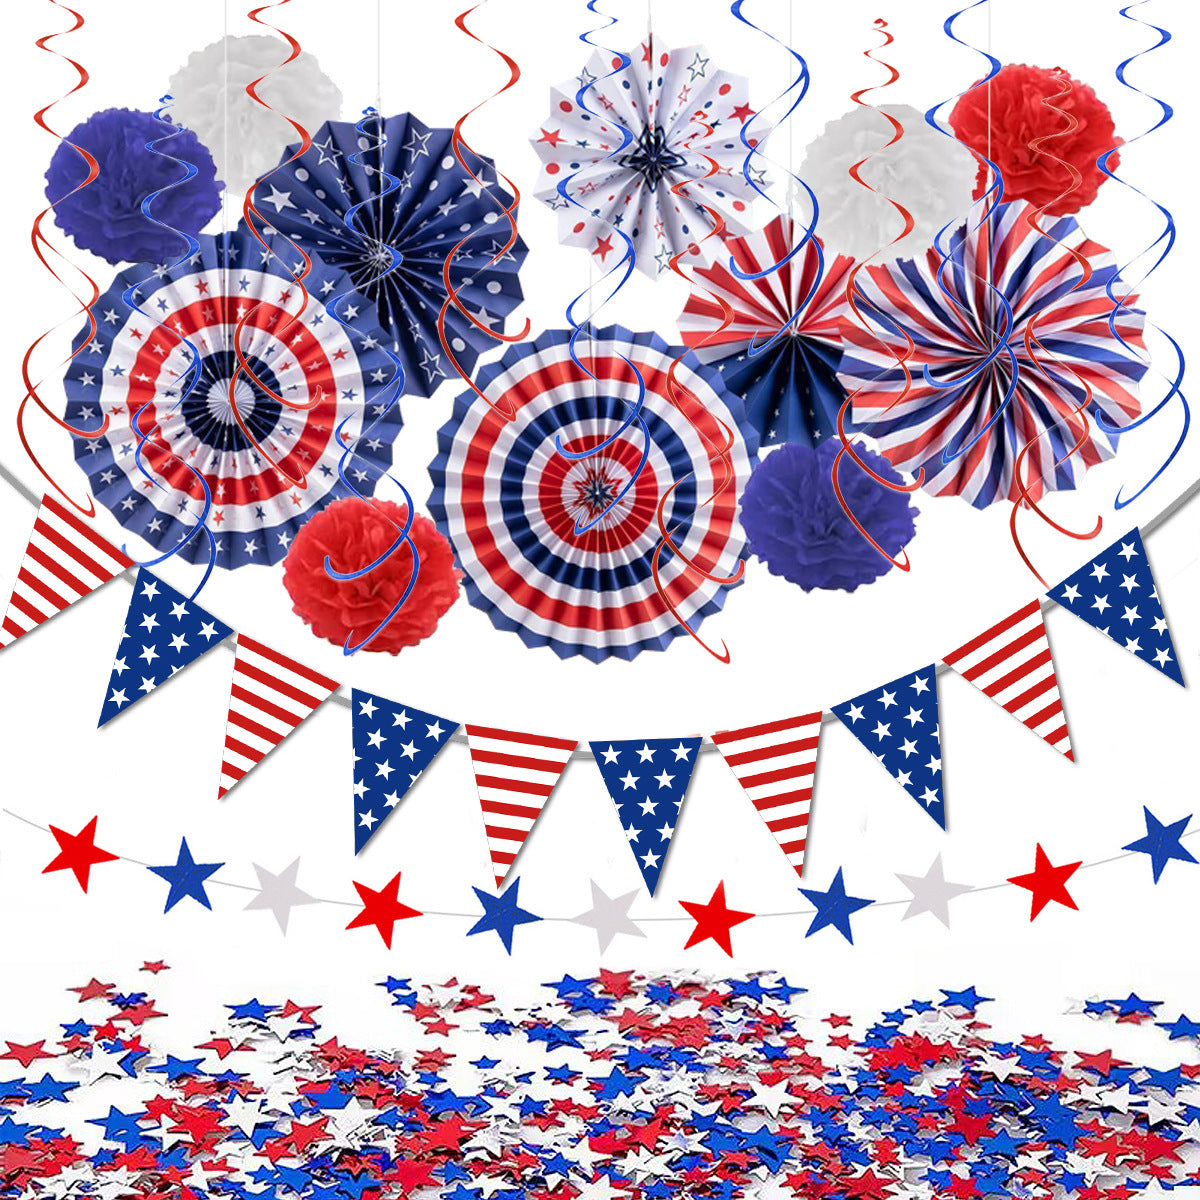 Bulk Independence Day Party Decorations Kit with Red White Blue Hanging Paper Fans Hanging Swirls Flag Pennant Foil Fringe Pom Poms for Holiday Party Supplies Decor Wholesale